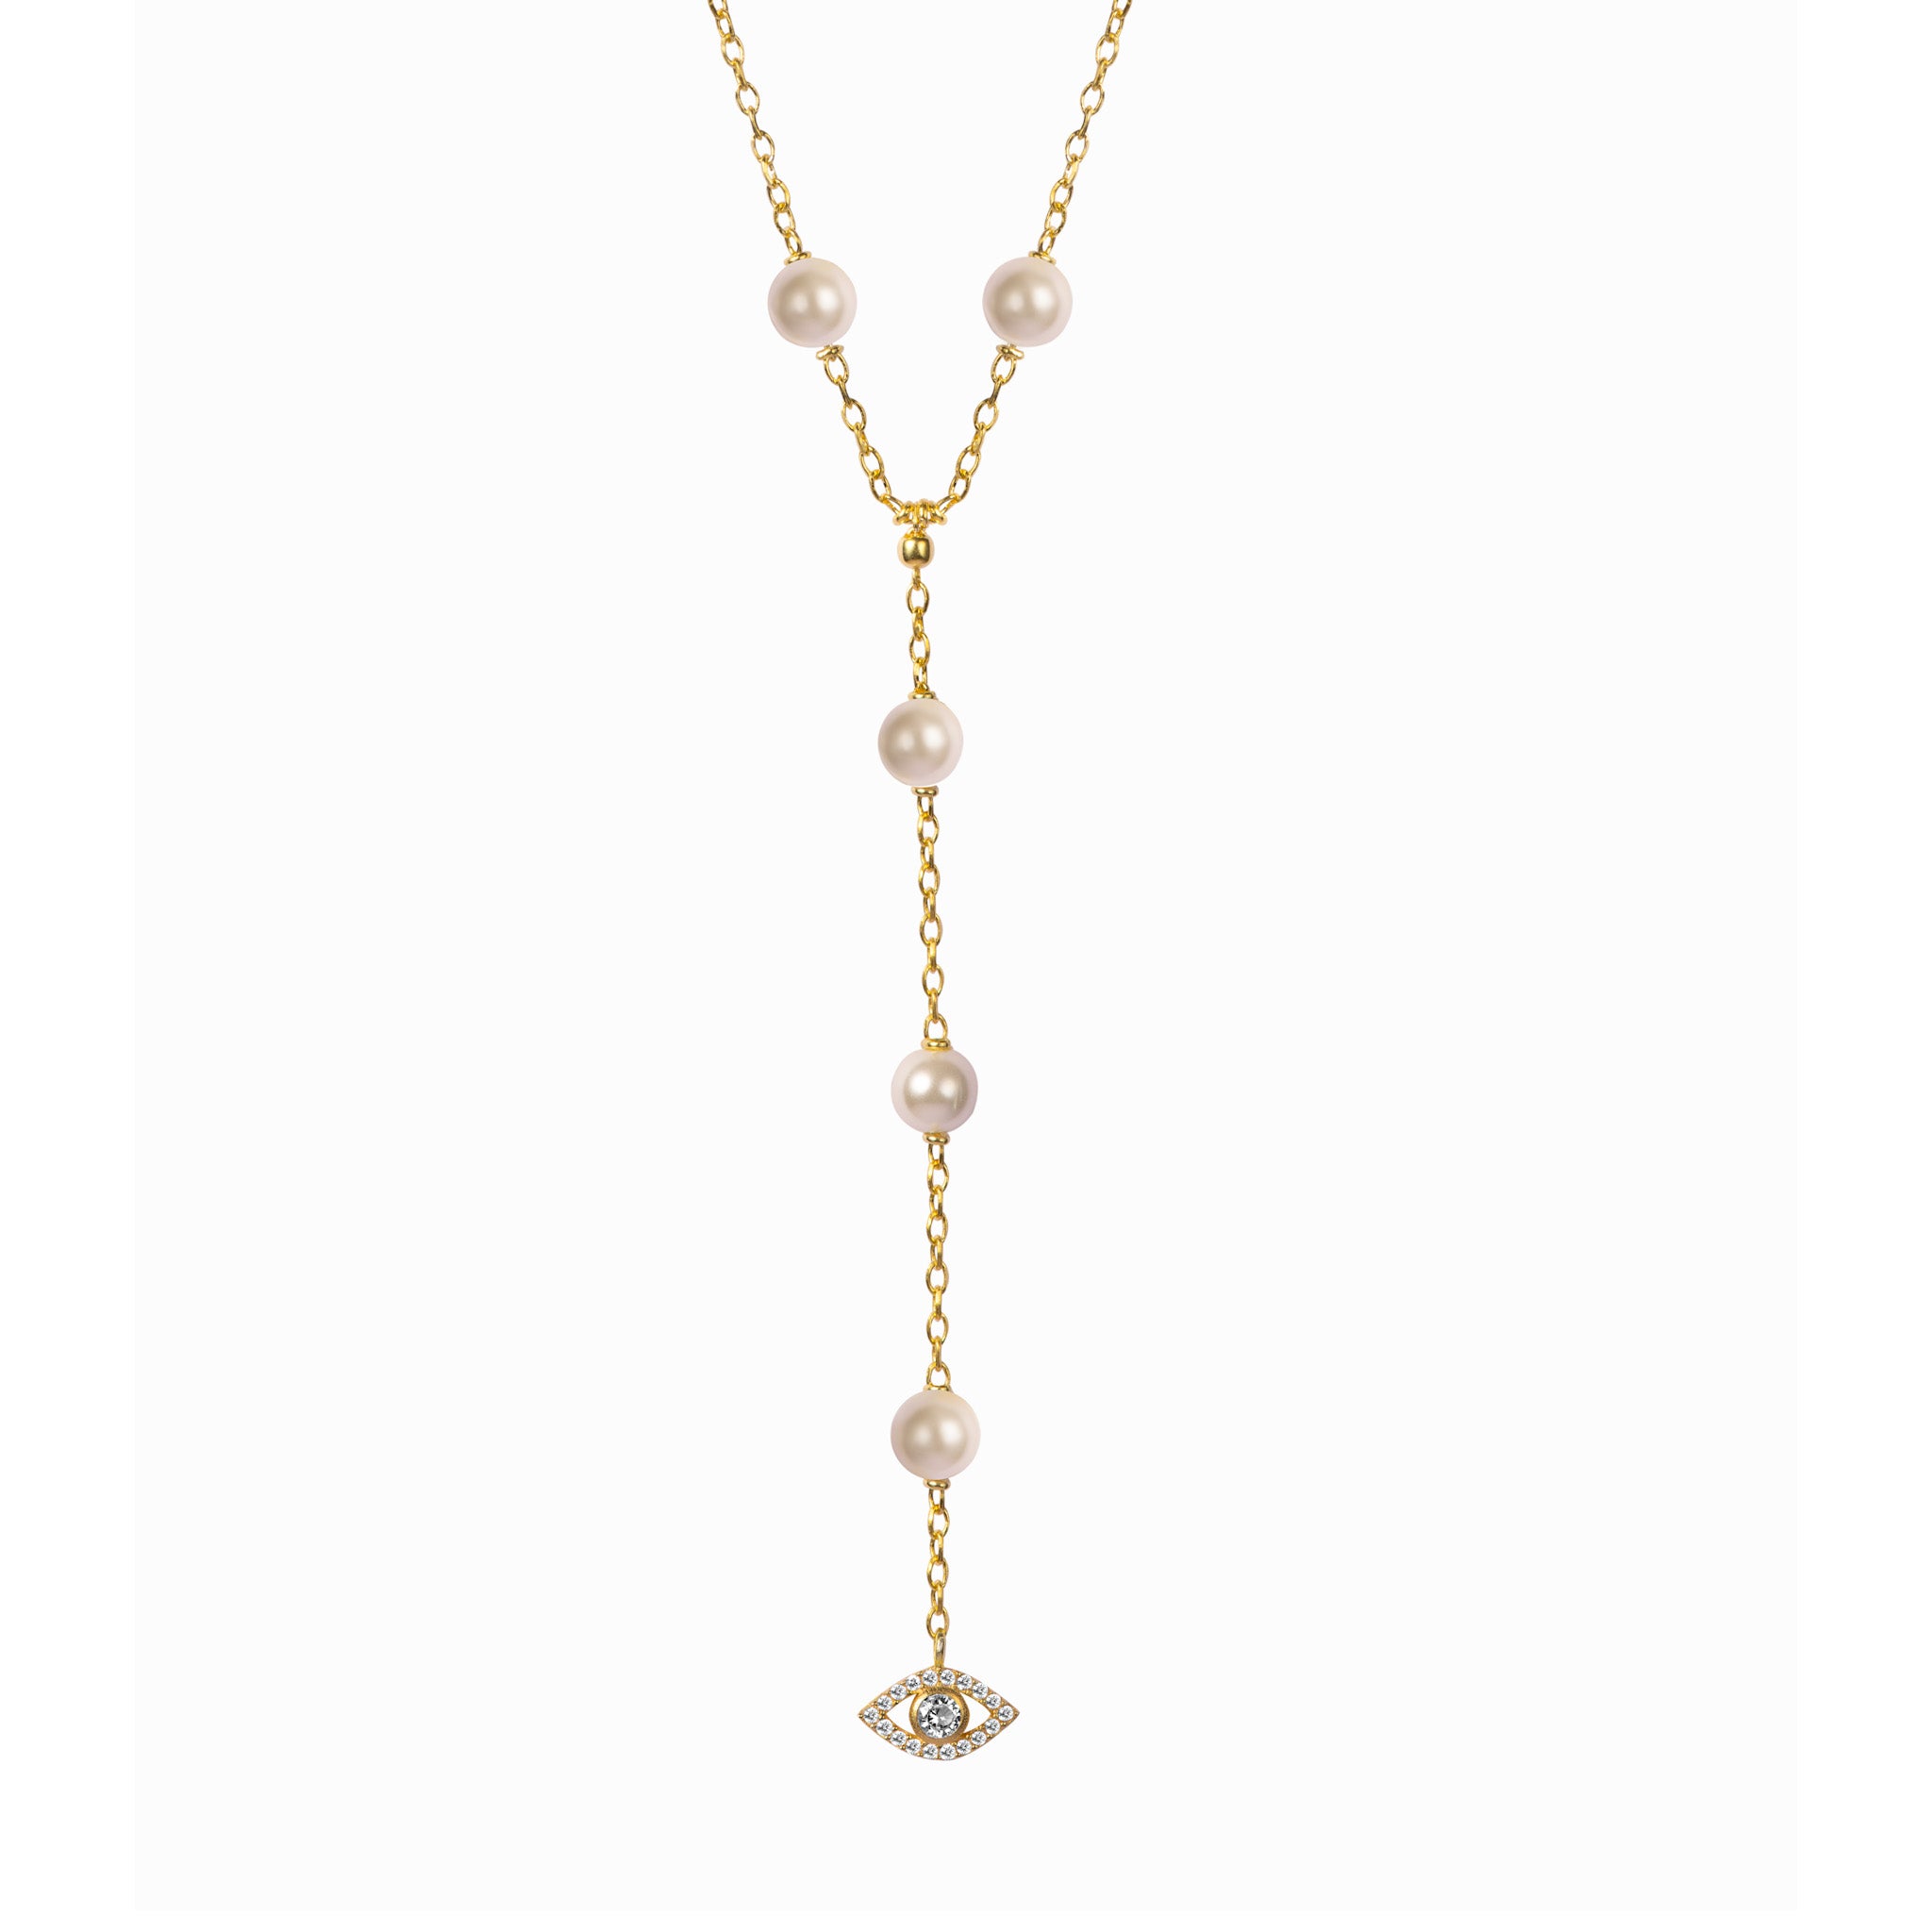 Silver 18kt gold plated pearl necklace lariat with cv pave diamond eye pendant